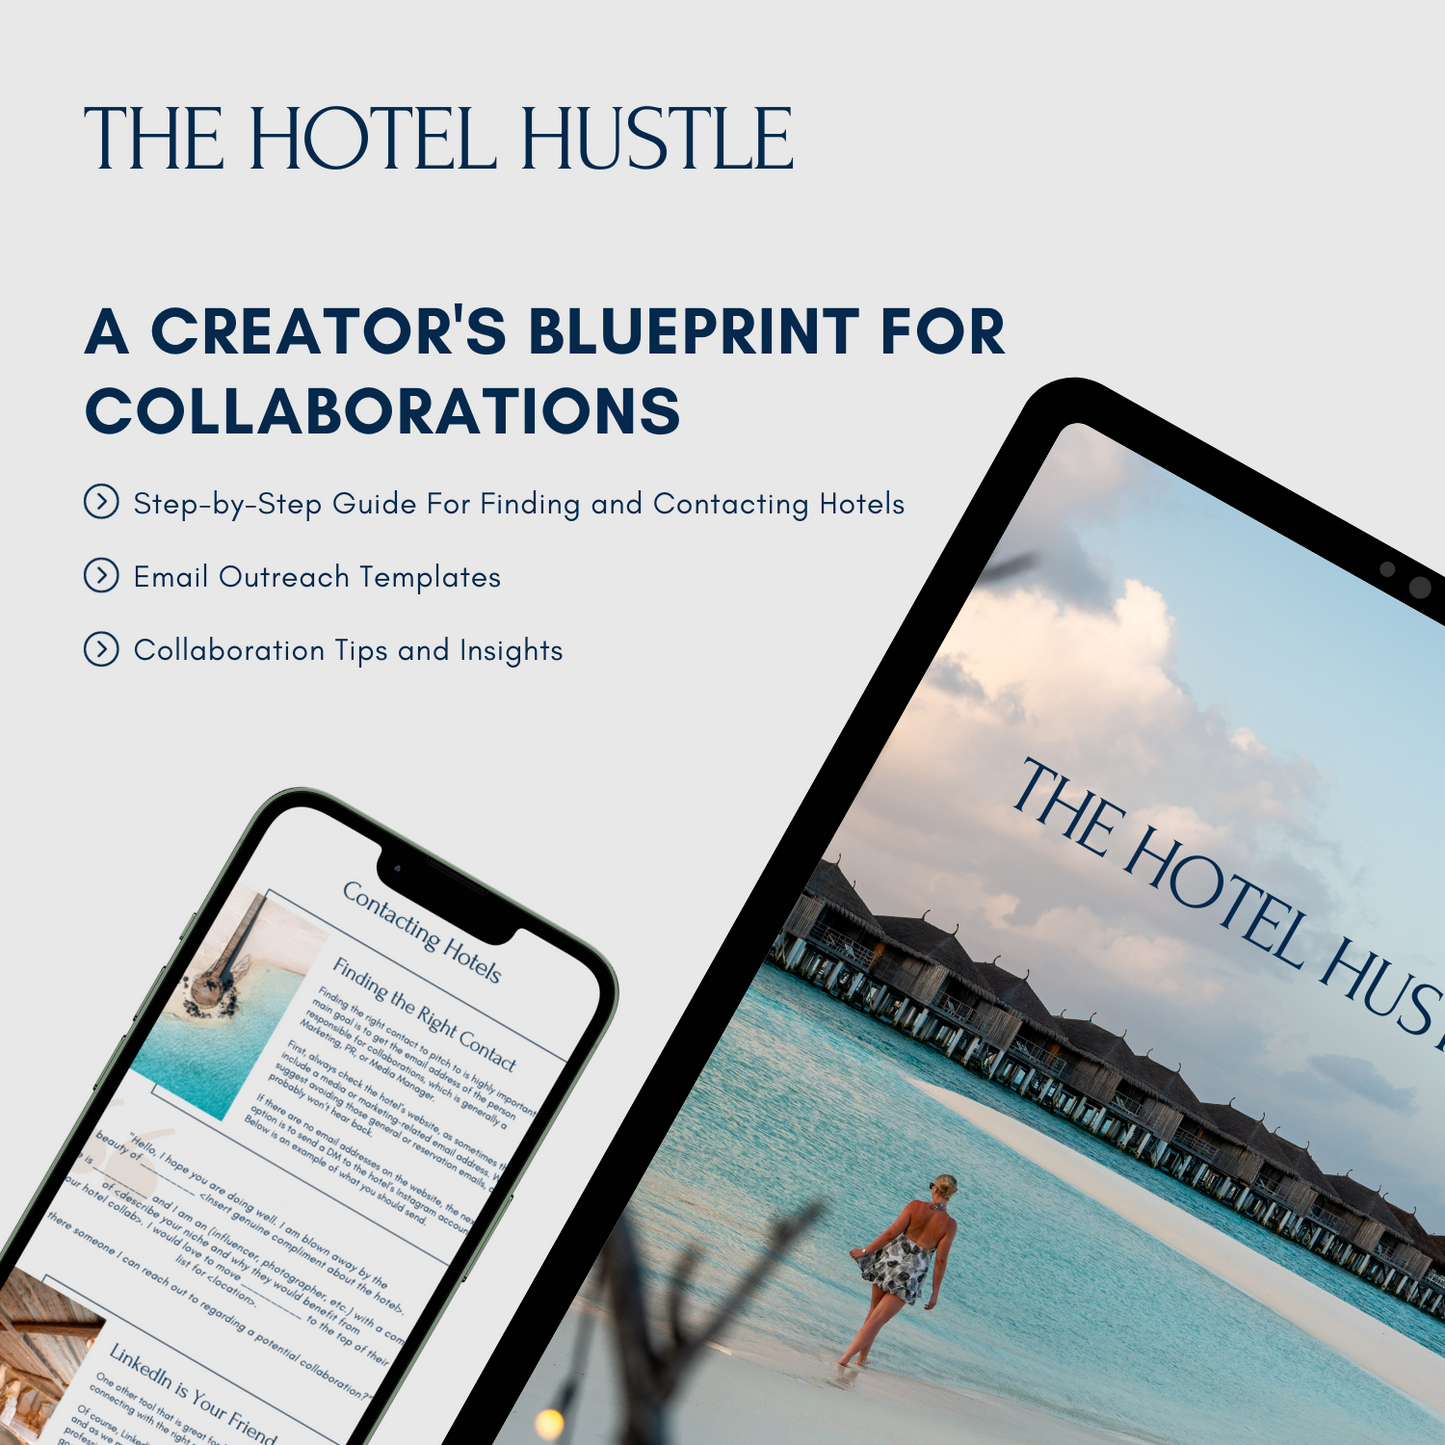 The Hotel Hustle: A Creator's Blueprint for Collaborations